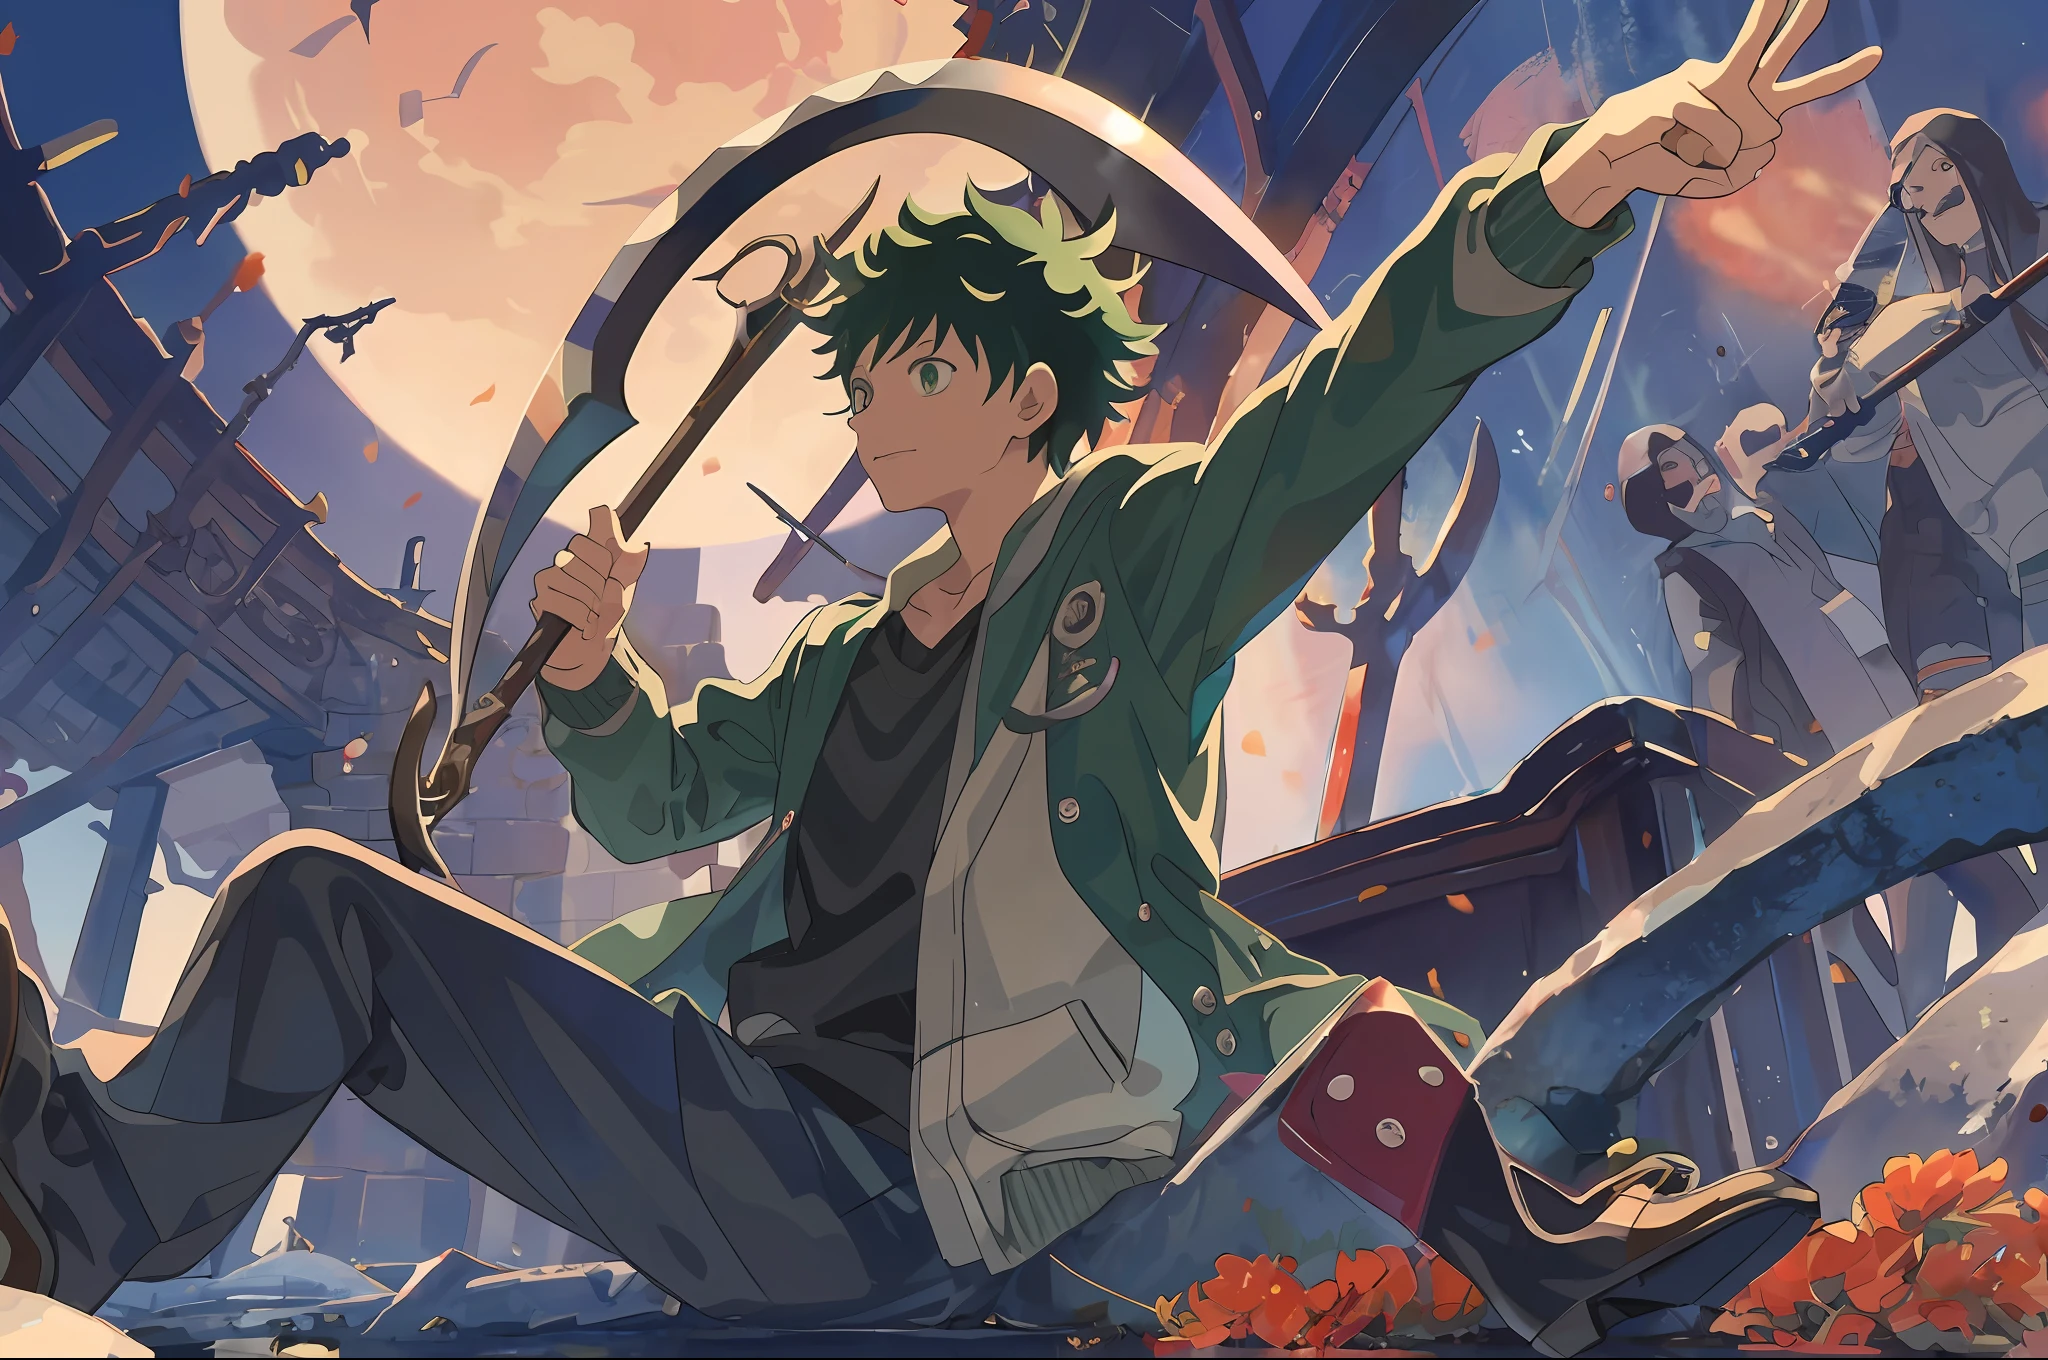 " IZUKU MIDORIYA as the Reaper Dressed in the garb of a plague doctor, wielding a scythe in a graveyard under the crimson moonlight.